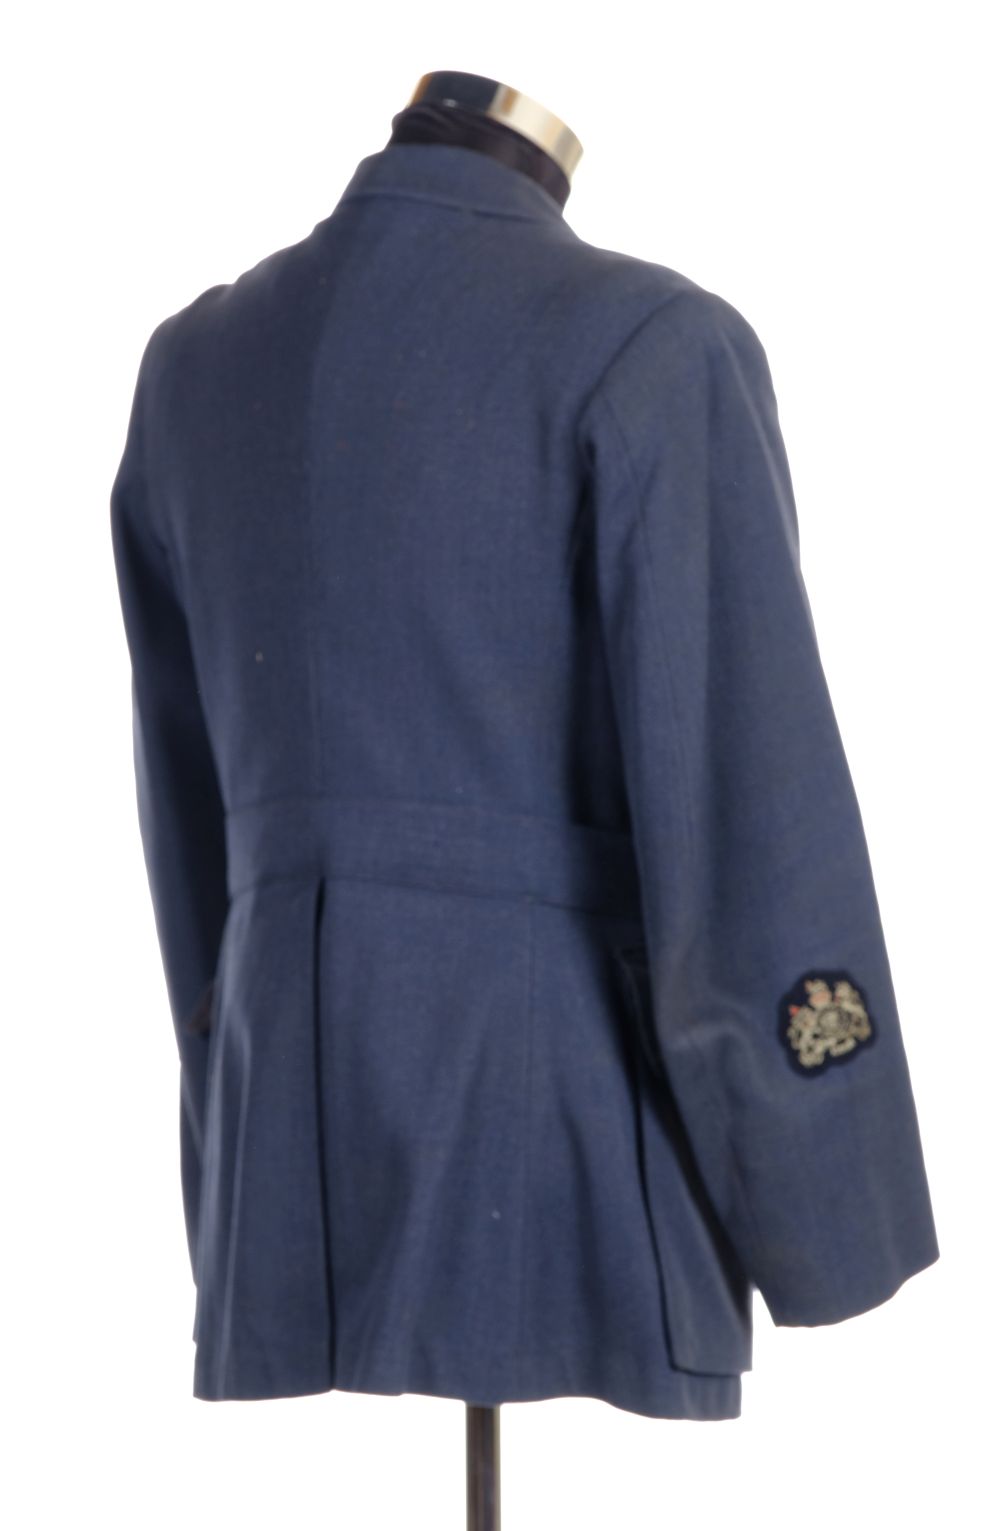 * RAF Uniform. A WWII RAF uniform worn by an Air Gunner, with cloth badge and King's crown brass ... - Image 2 of 4